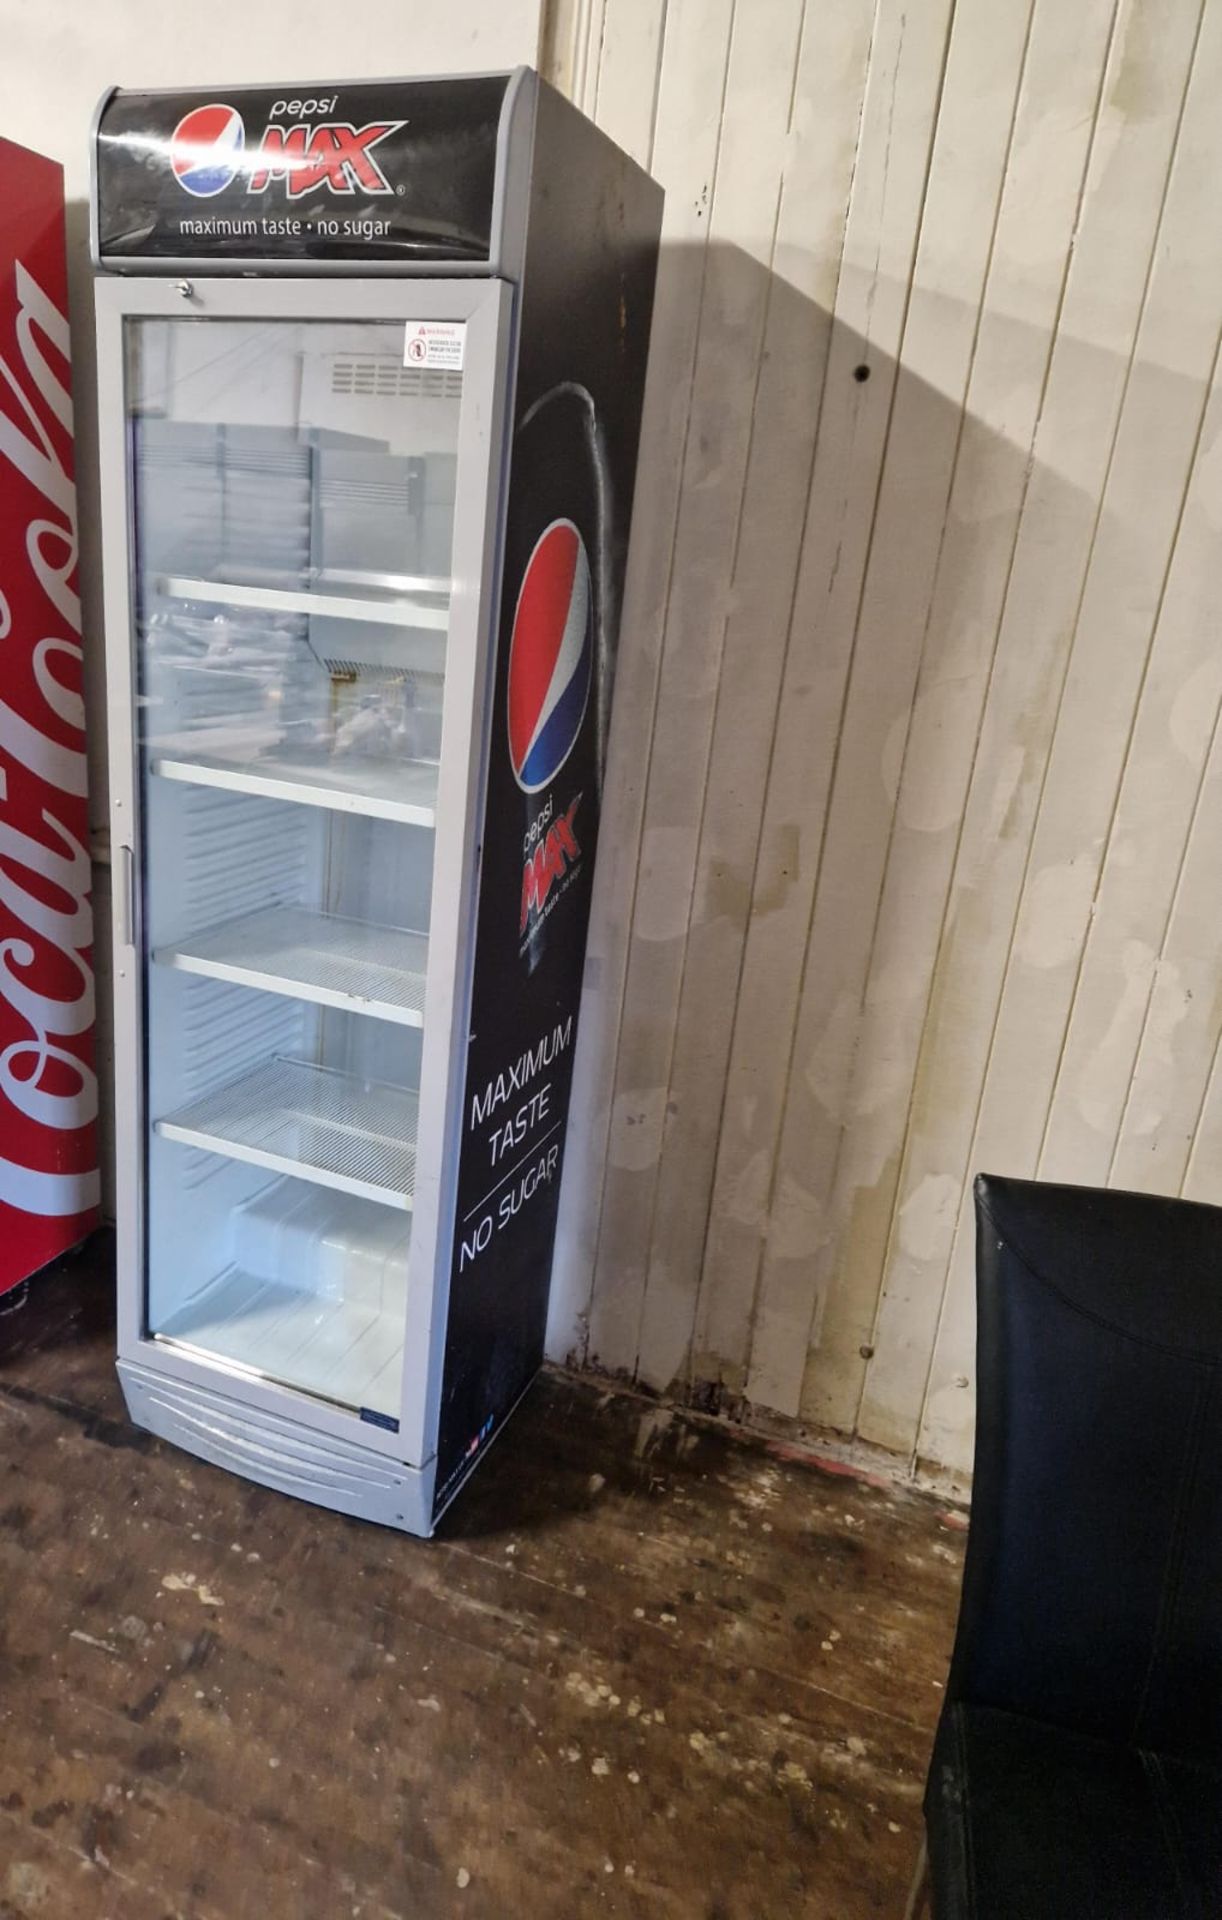 UPRIGHT GALLS DOOR DRINK FRIDGE PEPSI BRAND AND FULLY WORKING AND SERVICED - Image 3 of 3